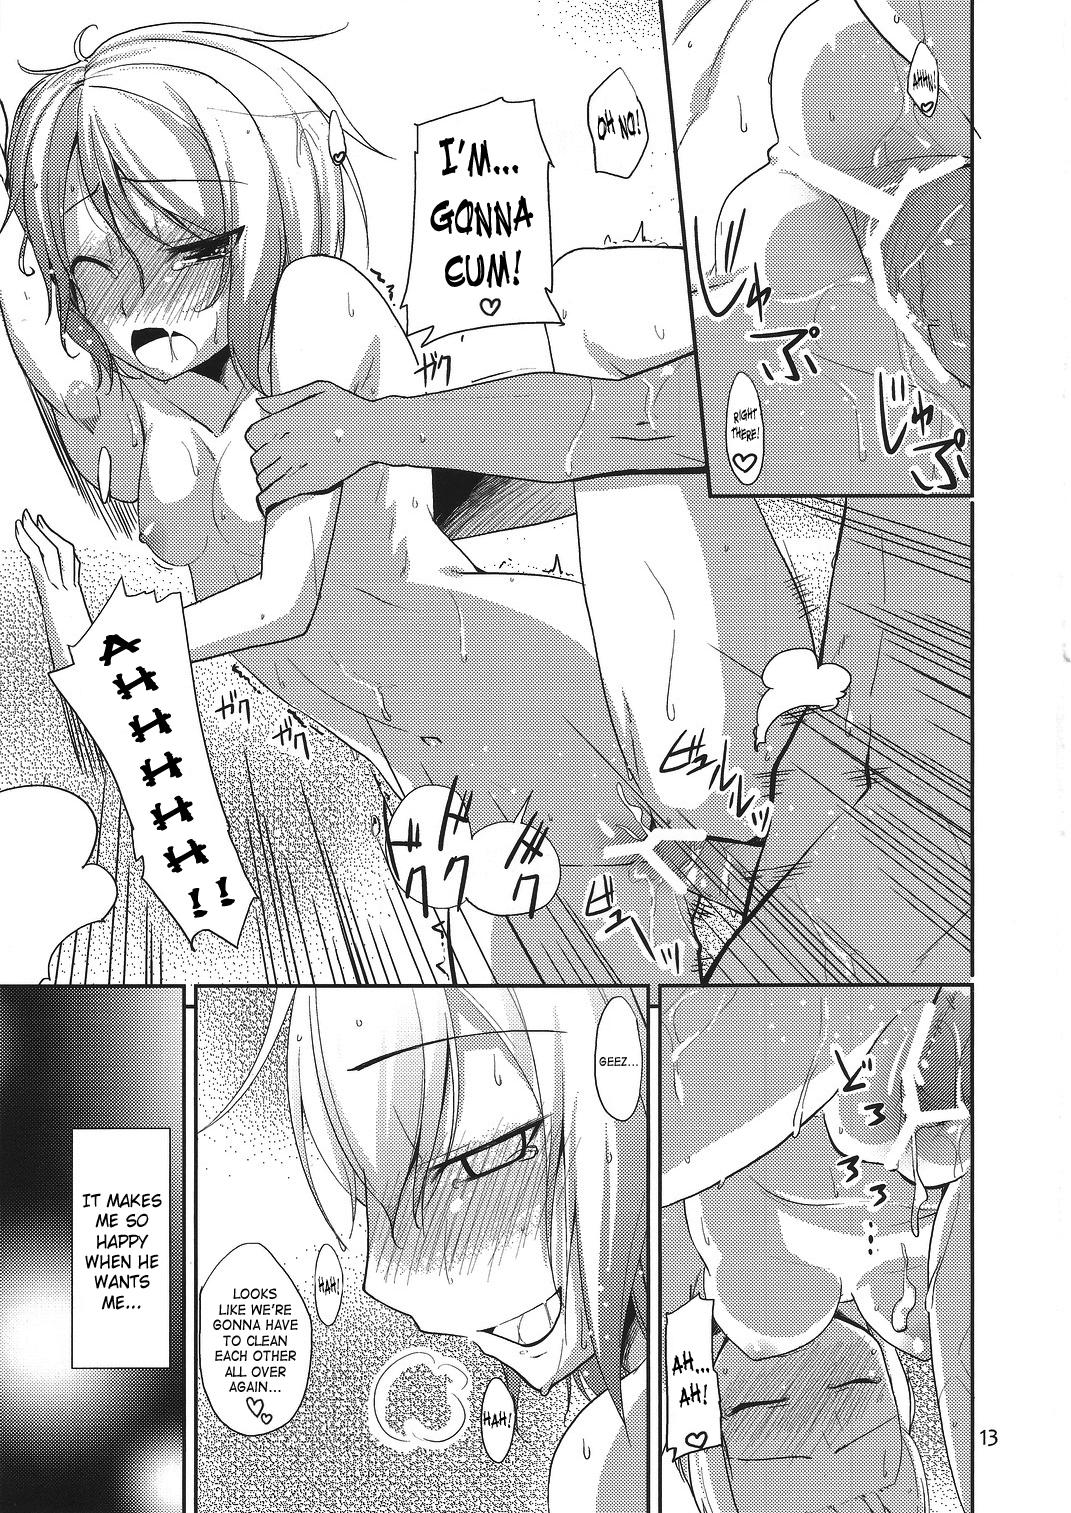 Pay Urakoi 2 - Touhou project Online - Page 12